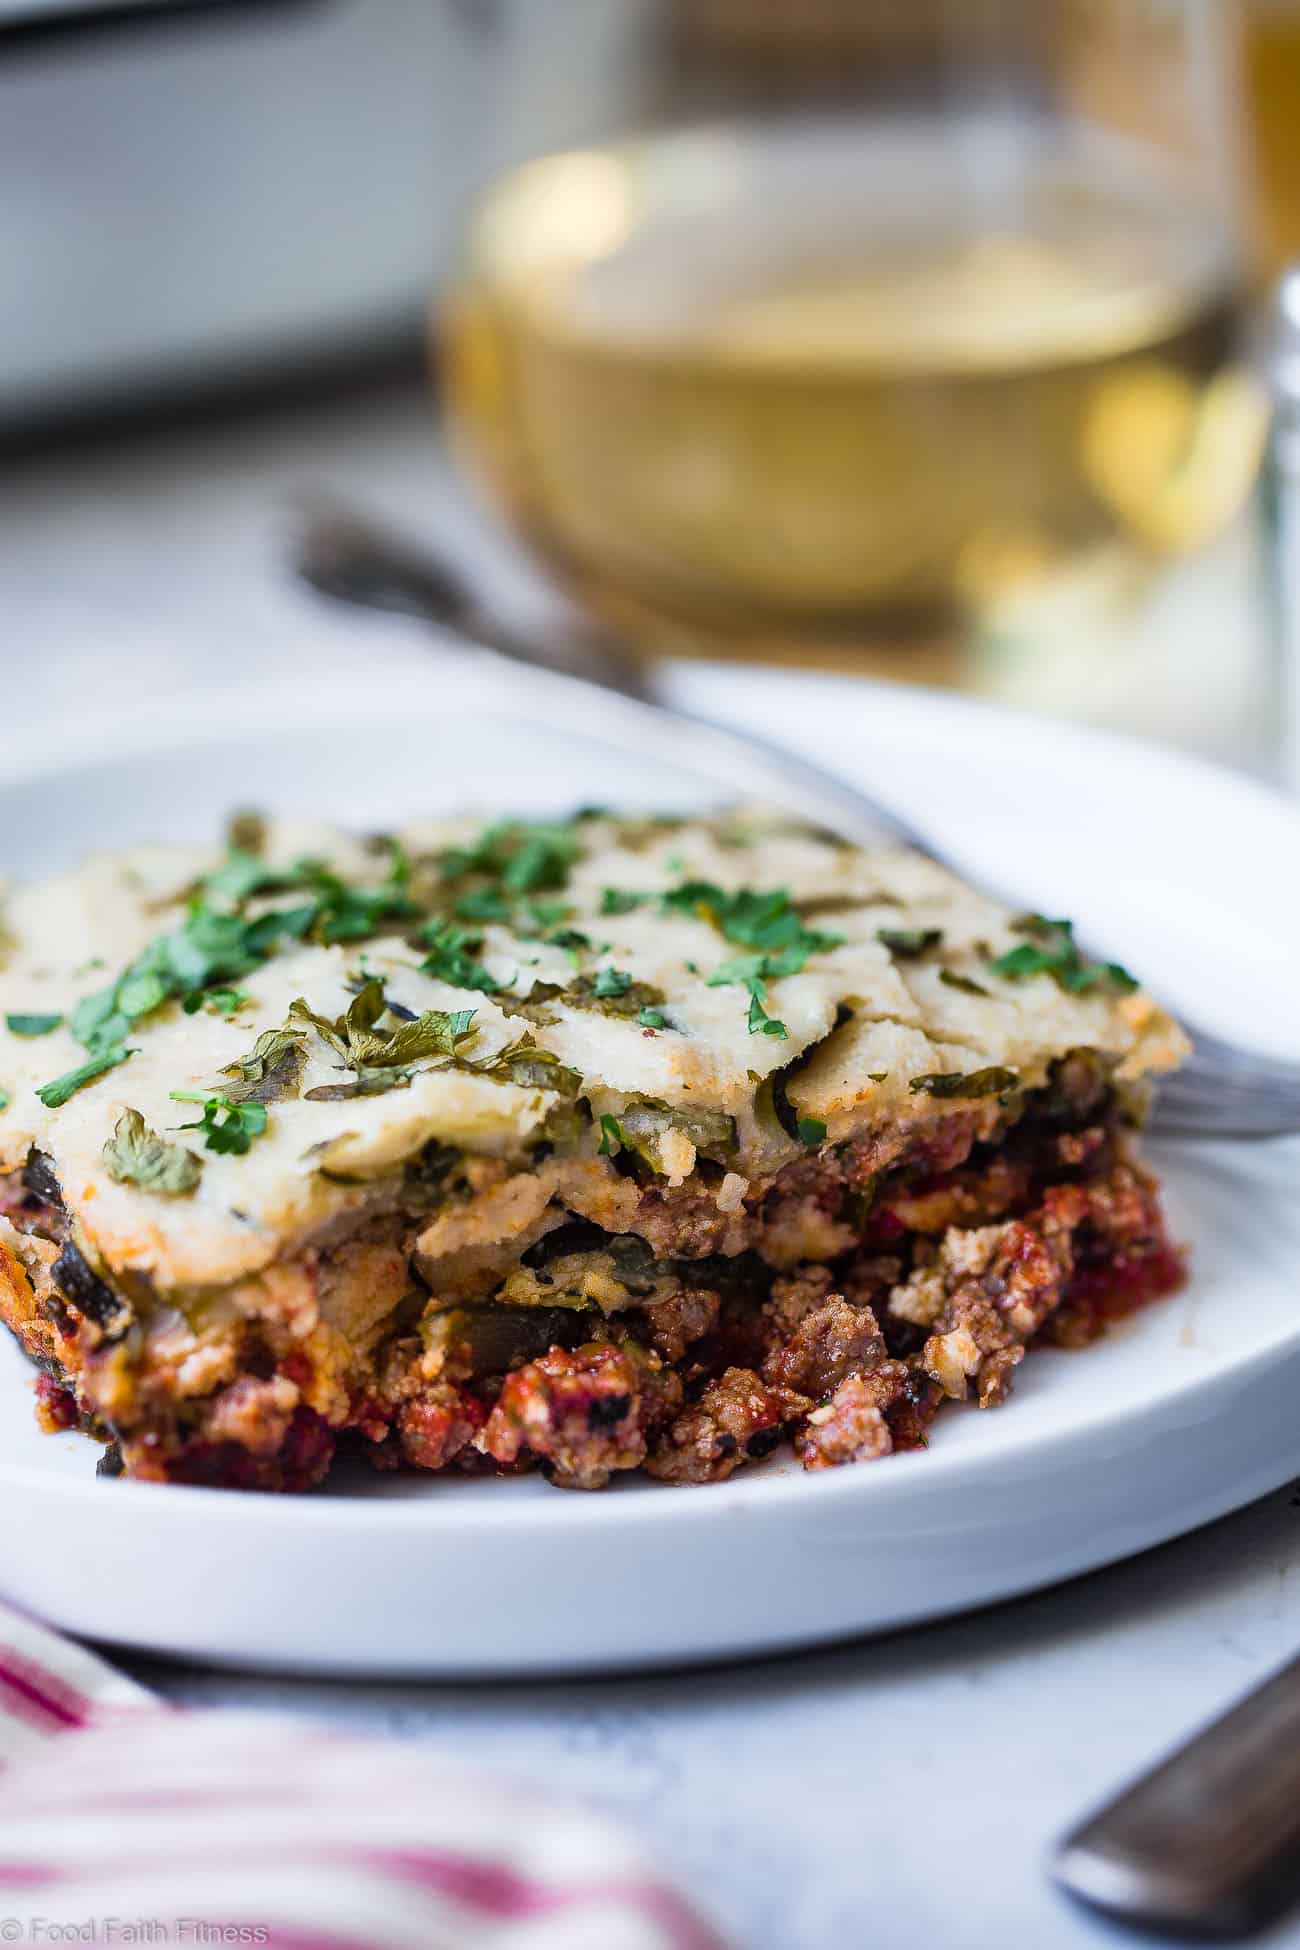 Low Carb Paleo Zucchini Lasagna - You will never know this family-pleasing lasagna is gluten/grain/dairy free, low carb and whole30 compliant! Not even the pickiest eaters will miss the cheese and pasta! | #Foodfaithfitness | #Paleo #whole30 #lowcarb #lasagna #glutenfree